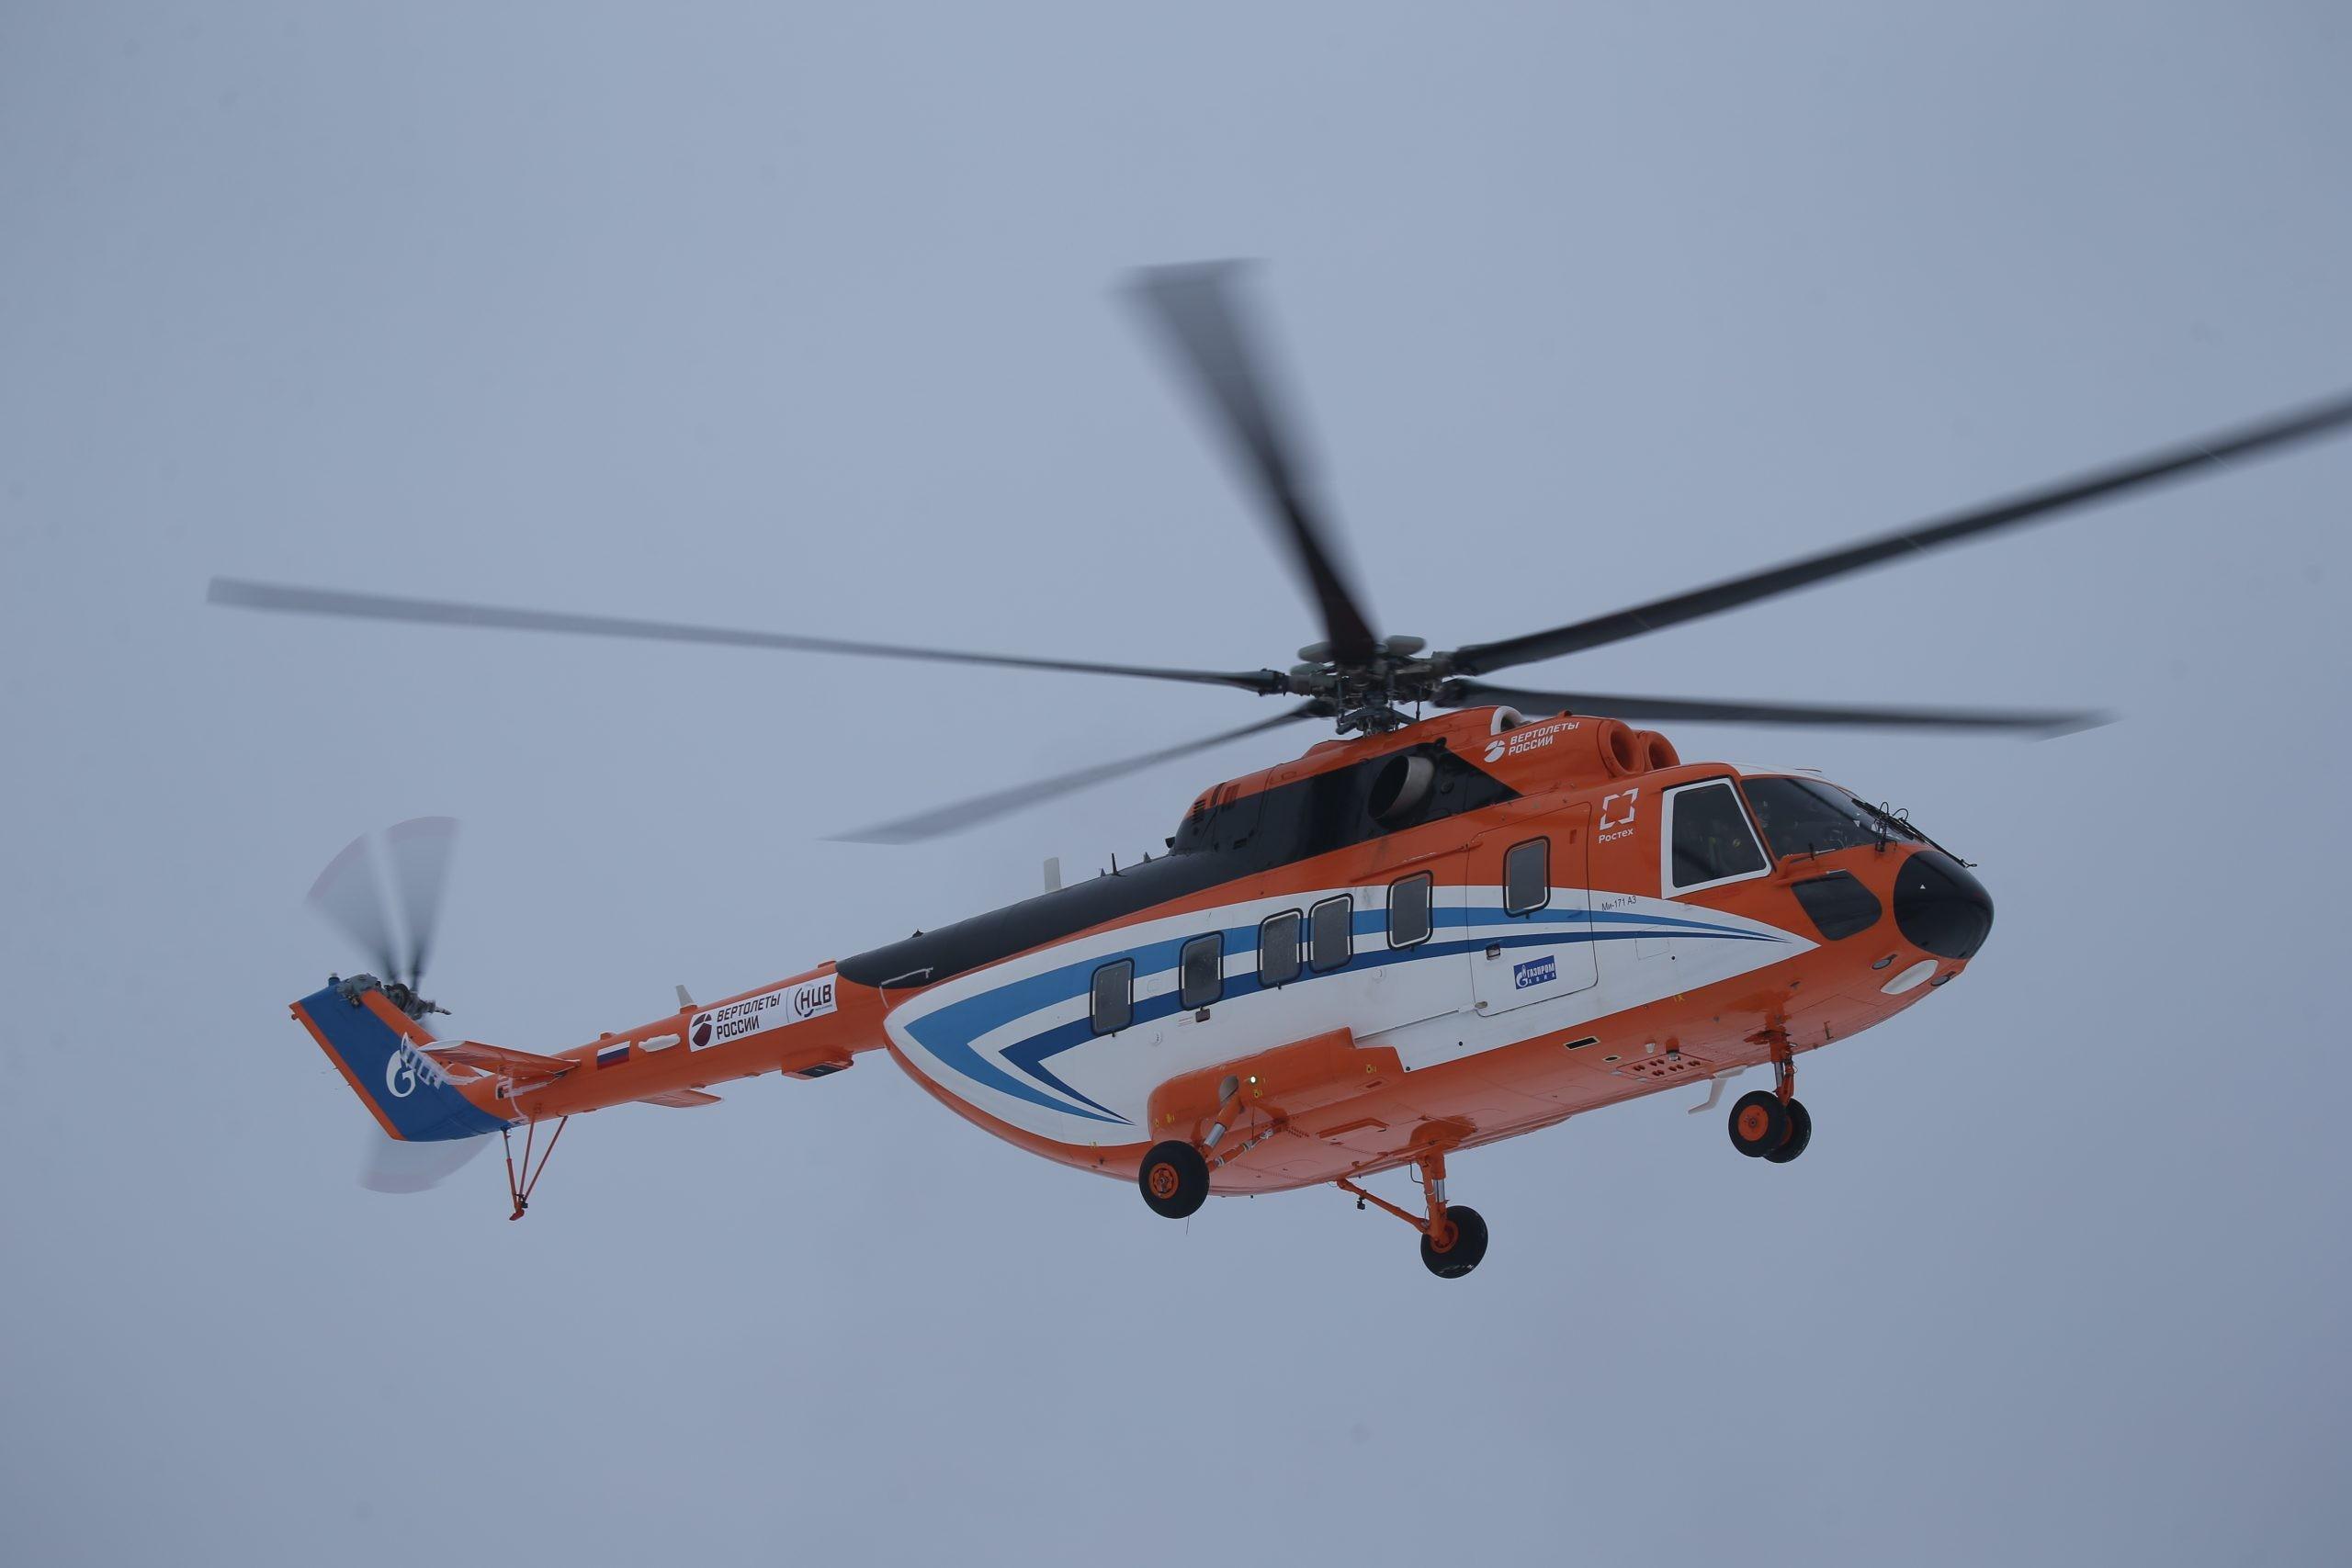 Mi-171A3 Offshore Helicopter Completes First Flight